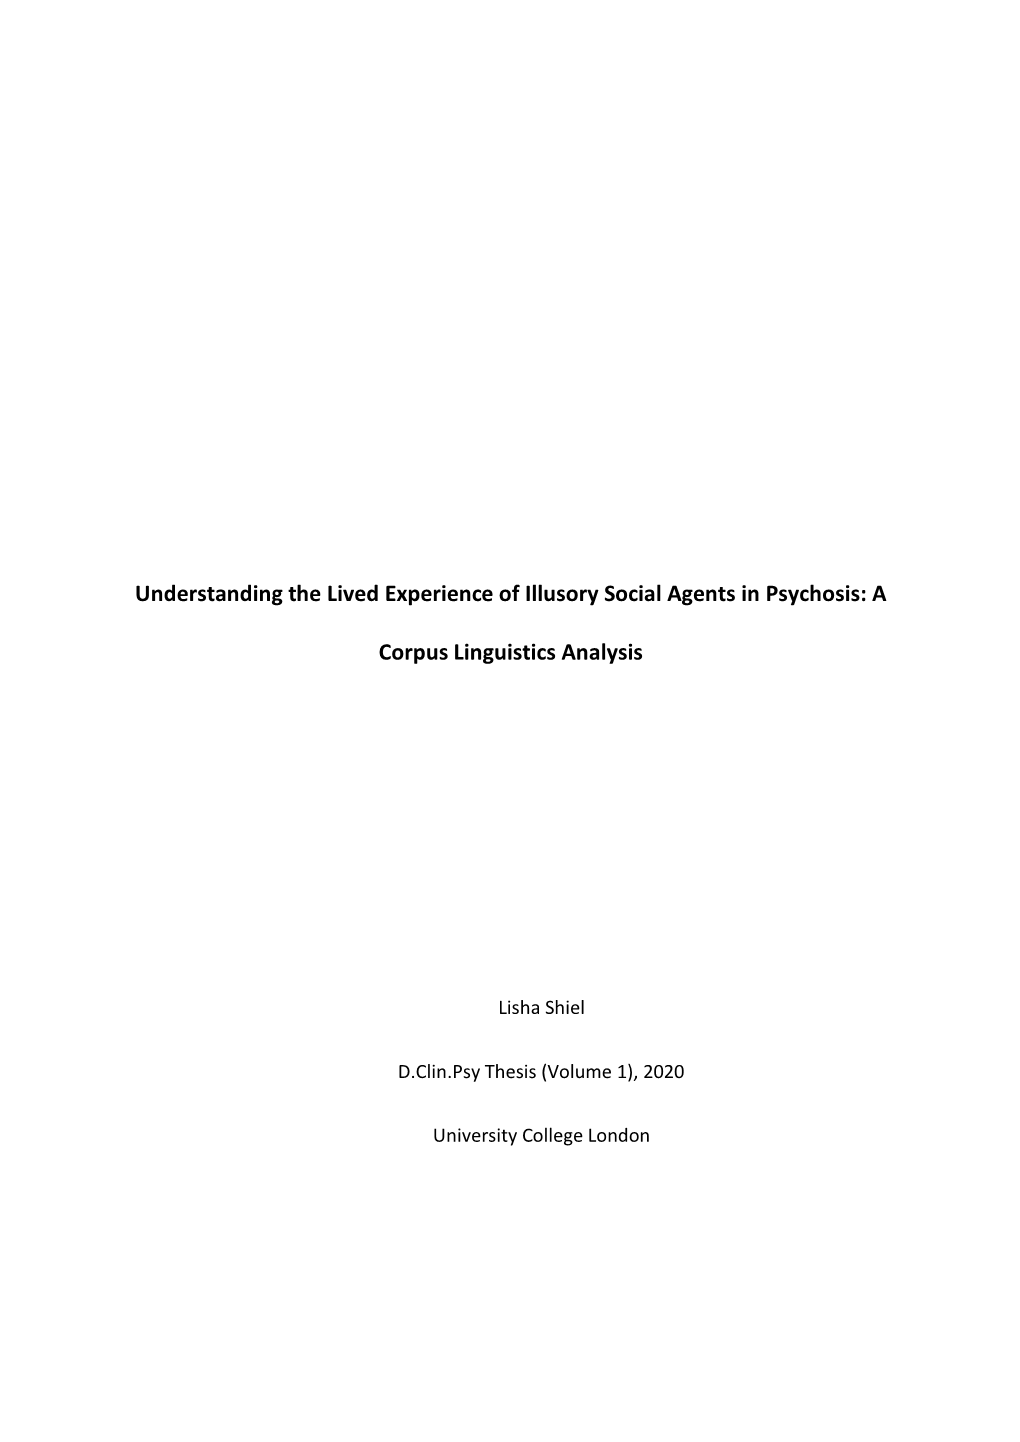 Understanding the Lived Experience of Illusory Social Agents in Psychosis: A